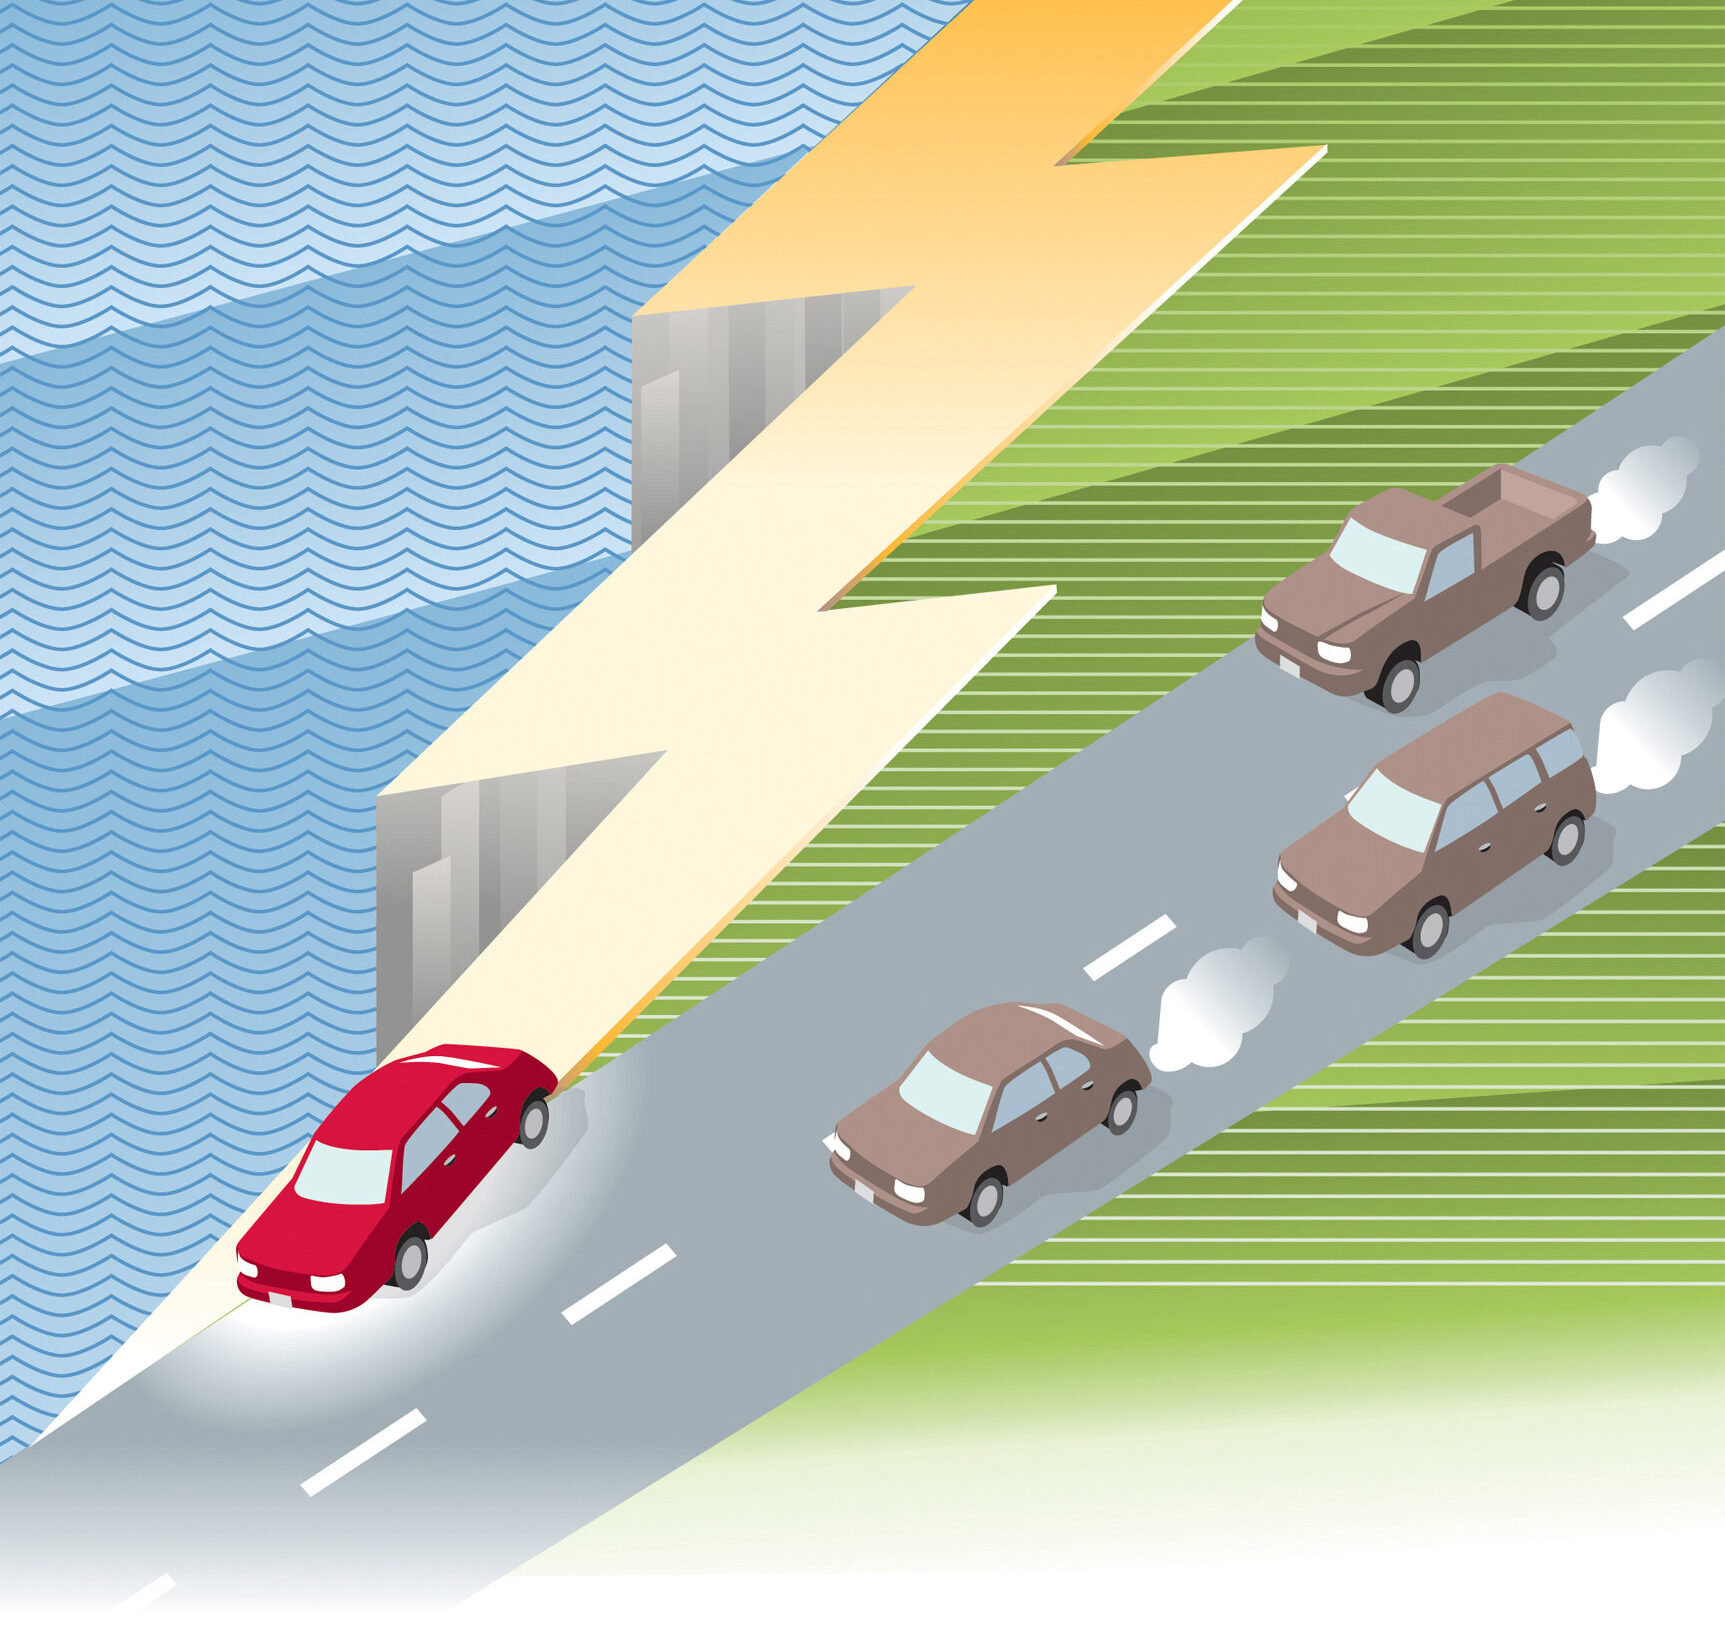 Illustration of electric car passing gas cars